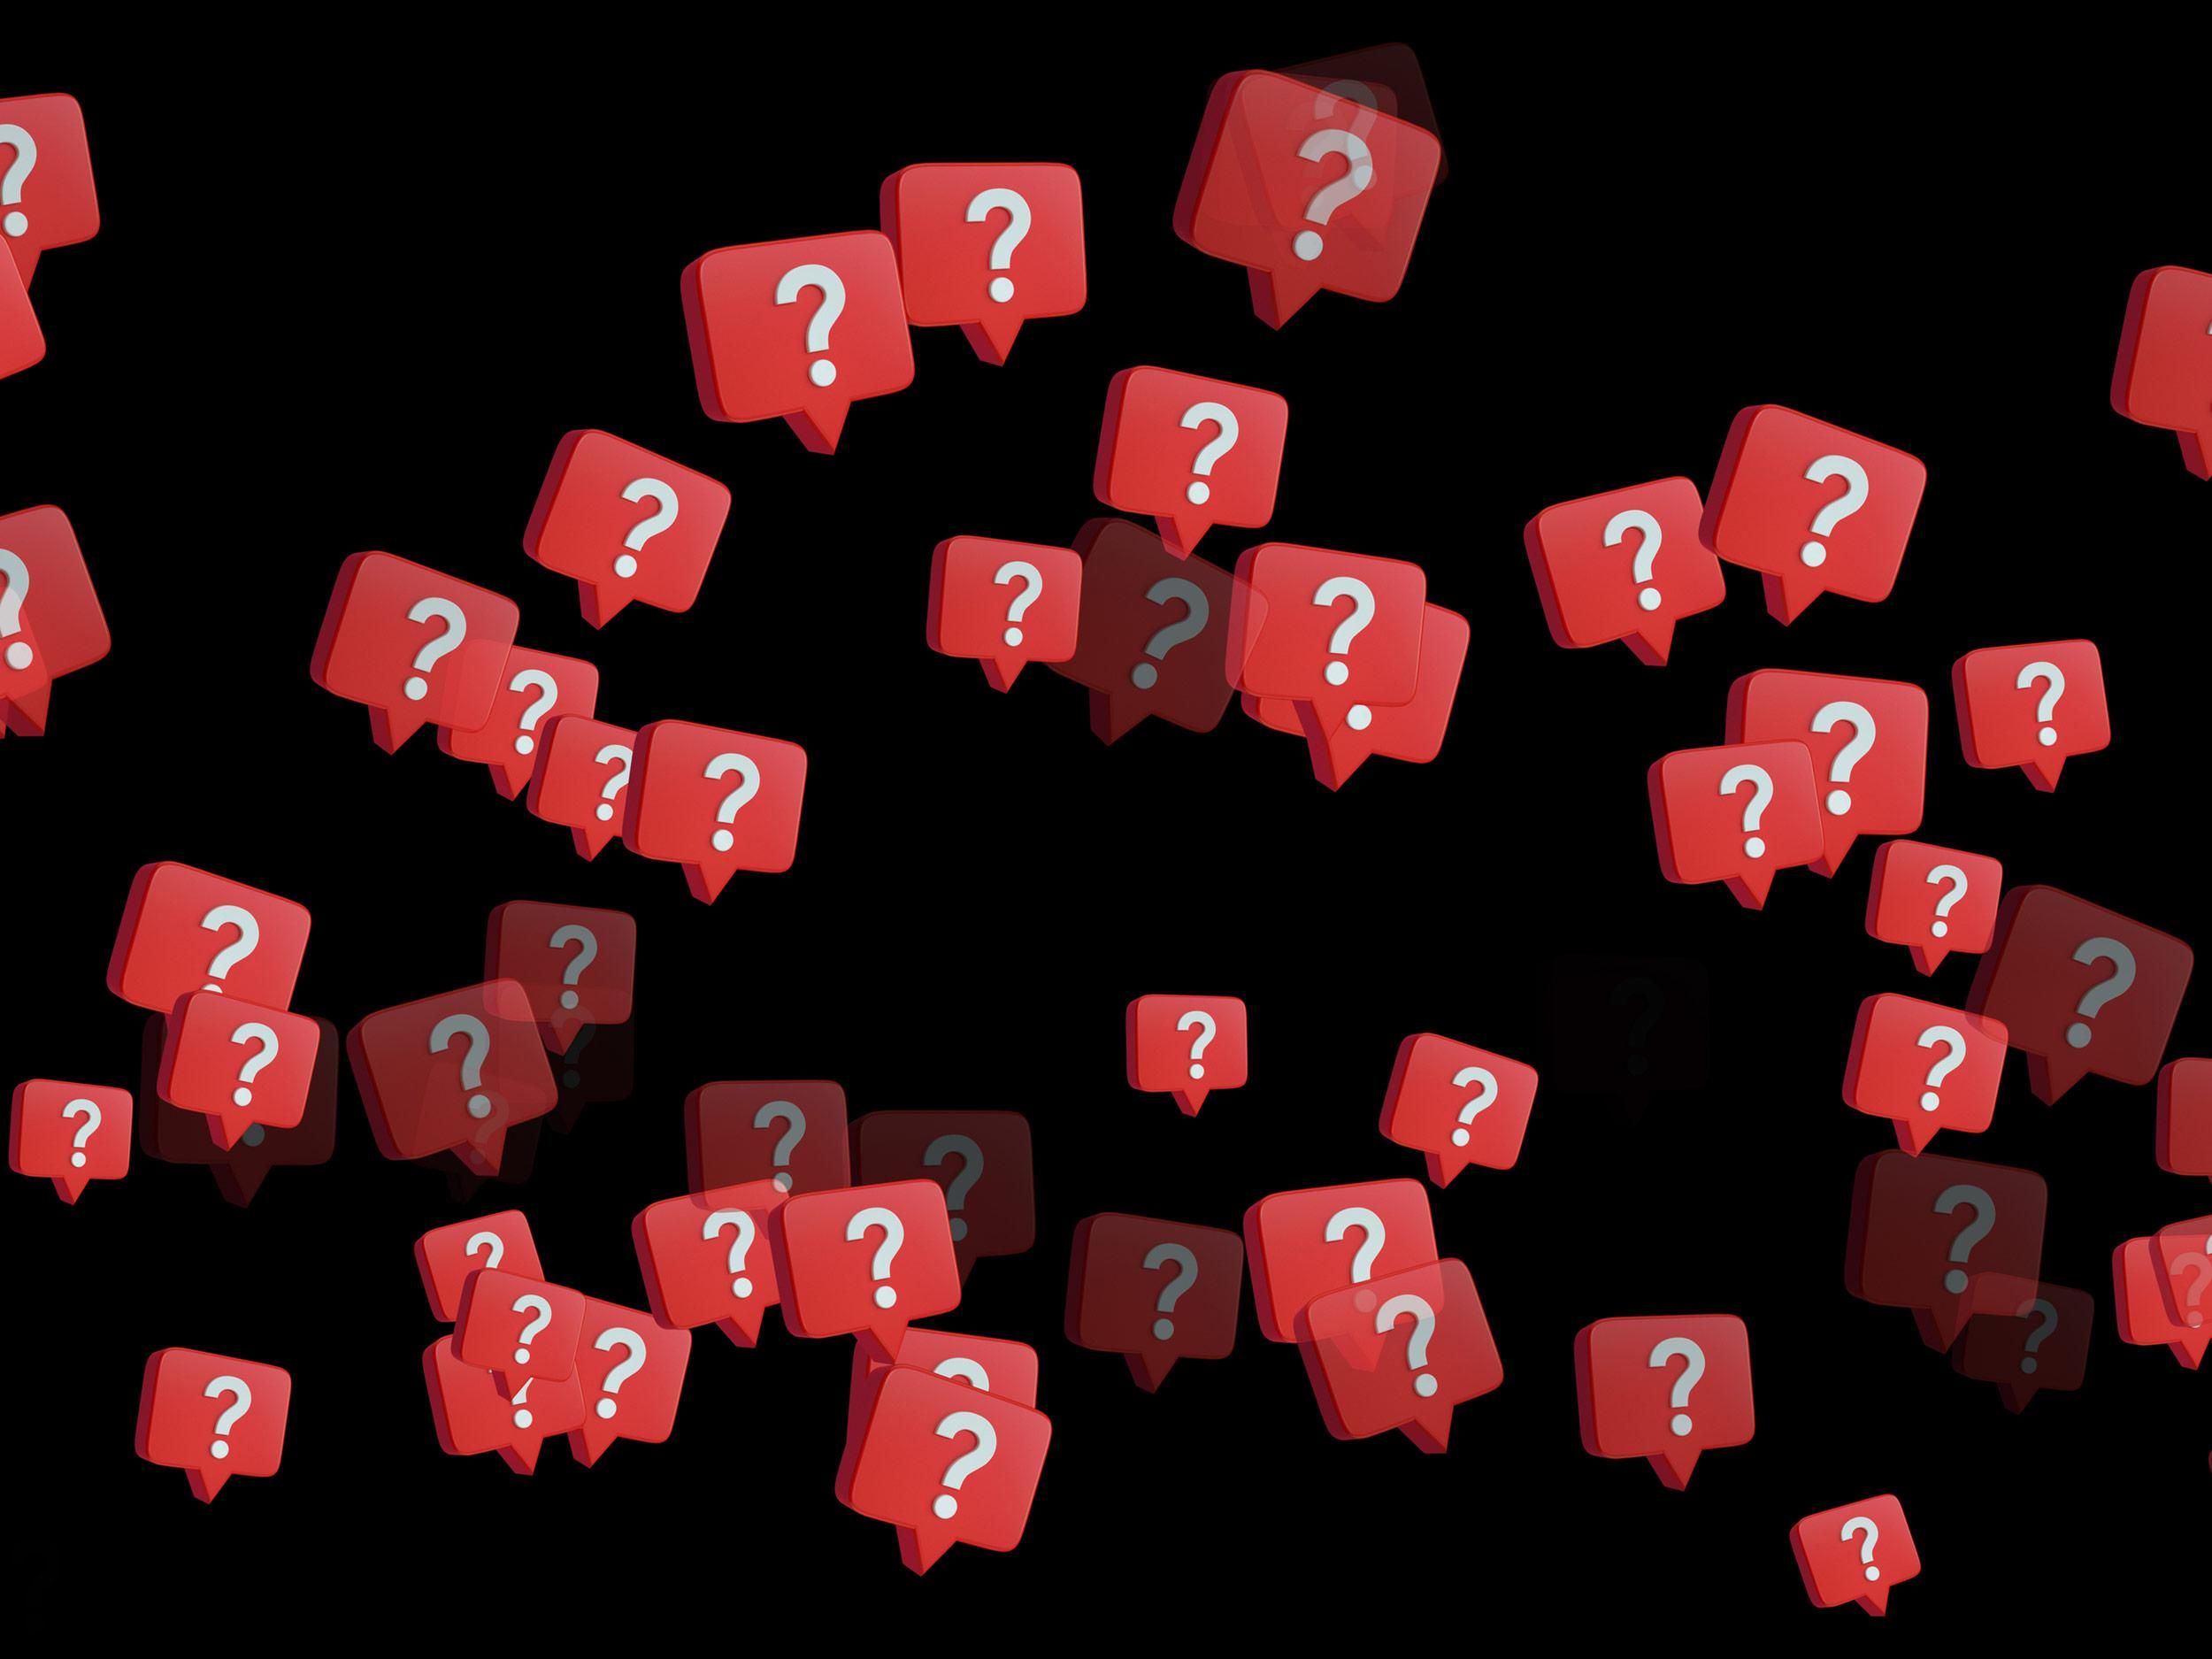 multiple red speech bubbles with question marks inside against a black background